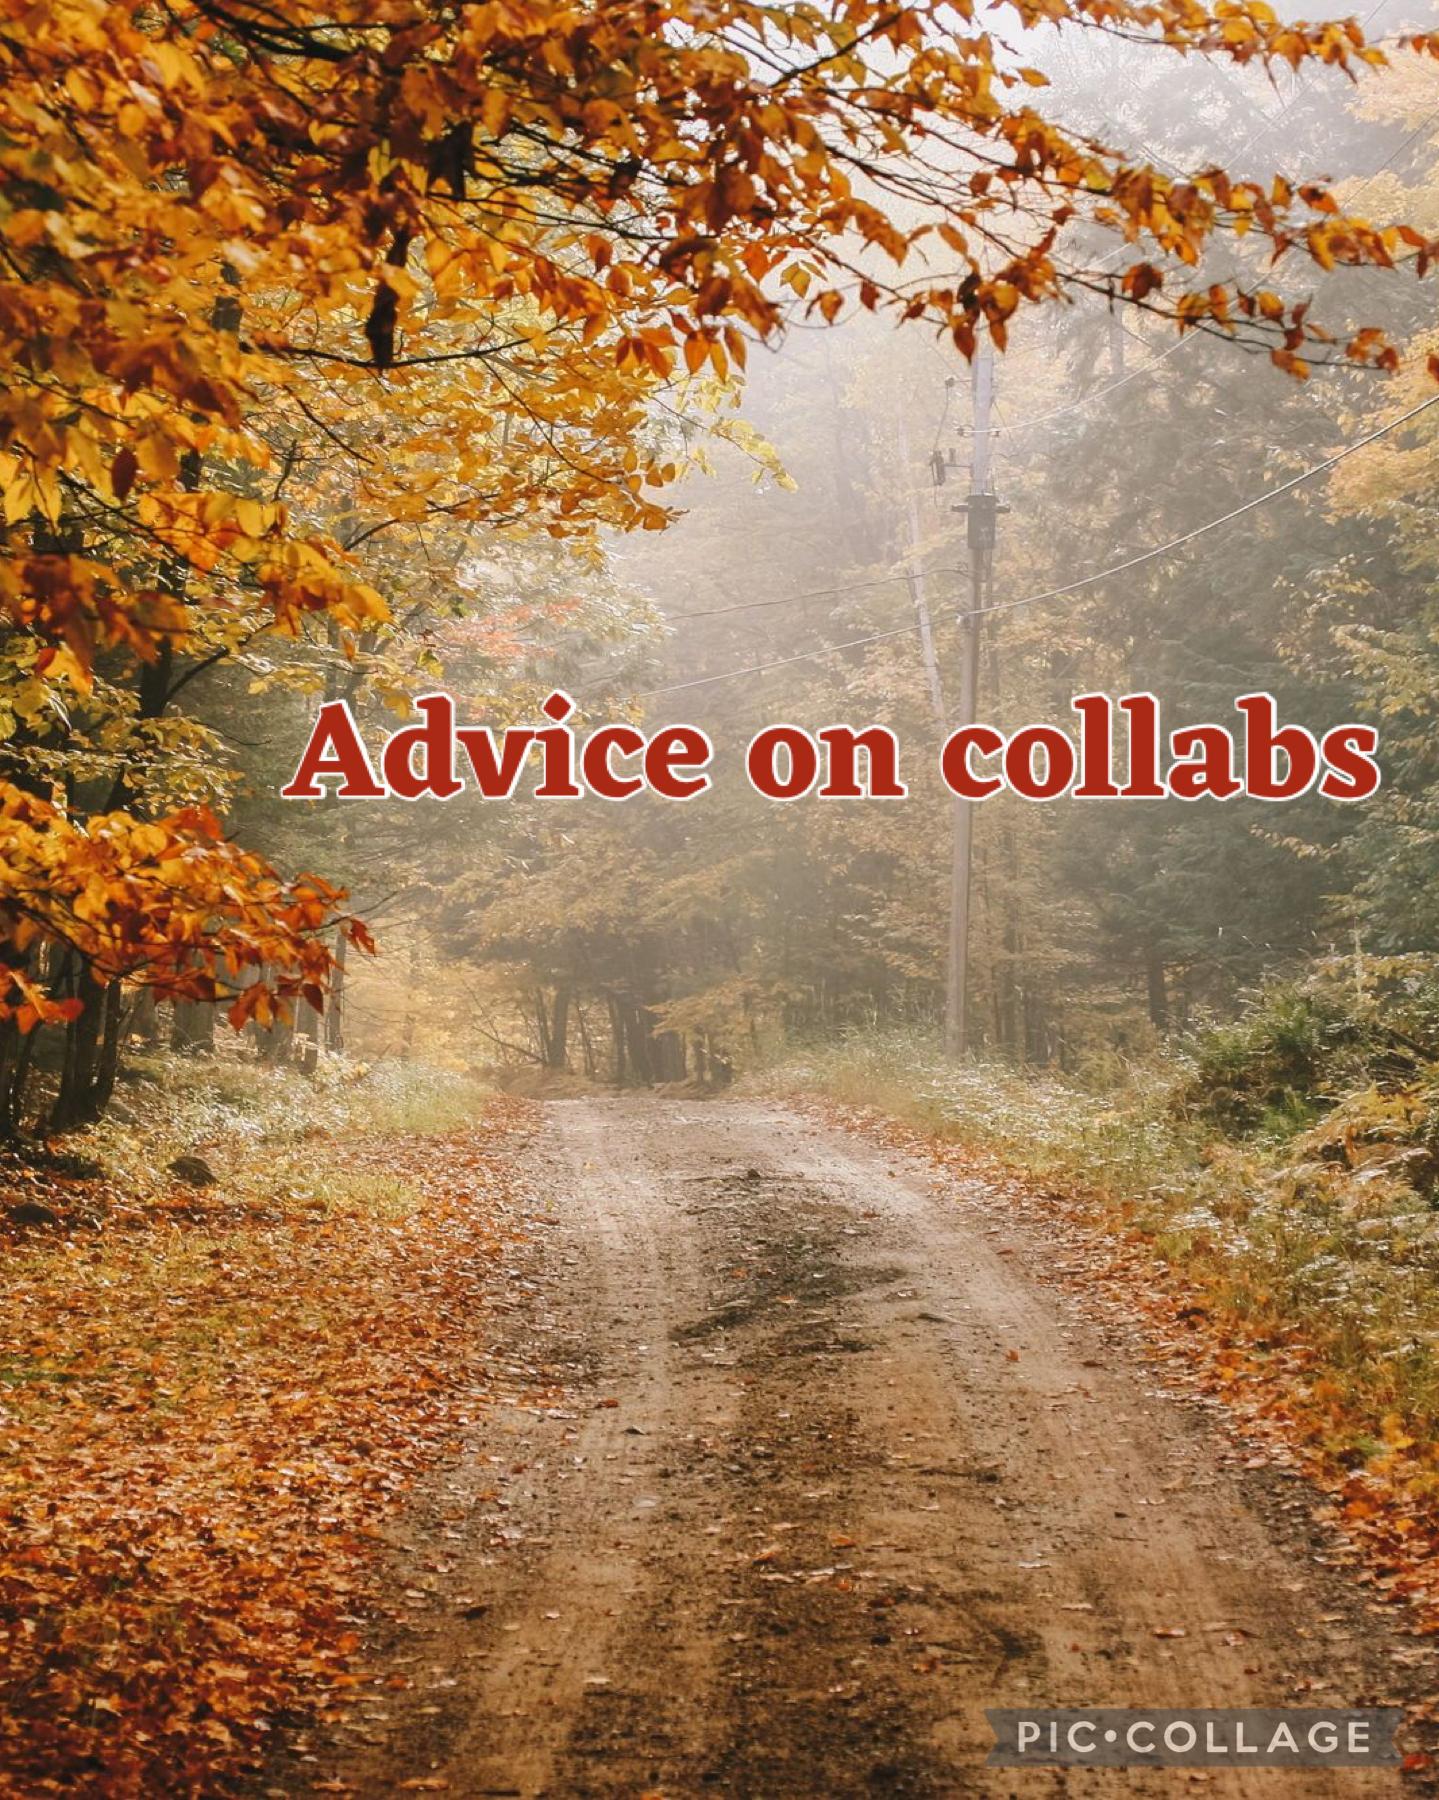 11.3.22 Advice on collabs 